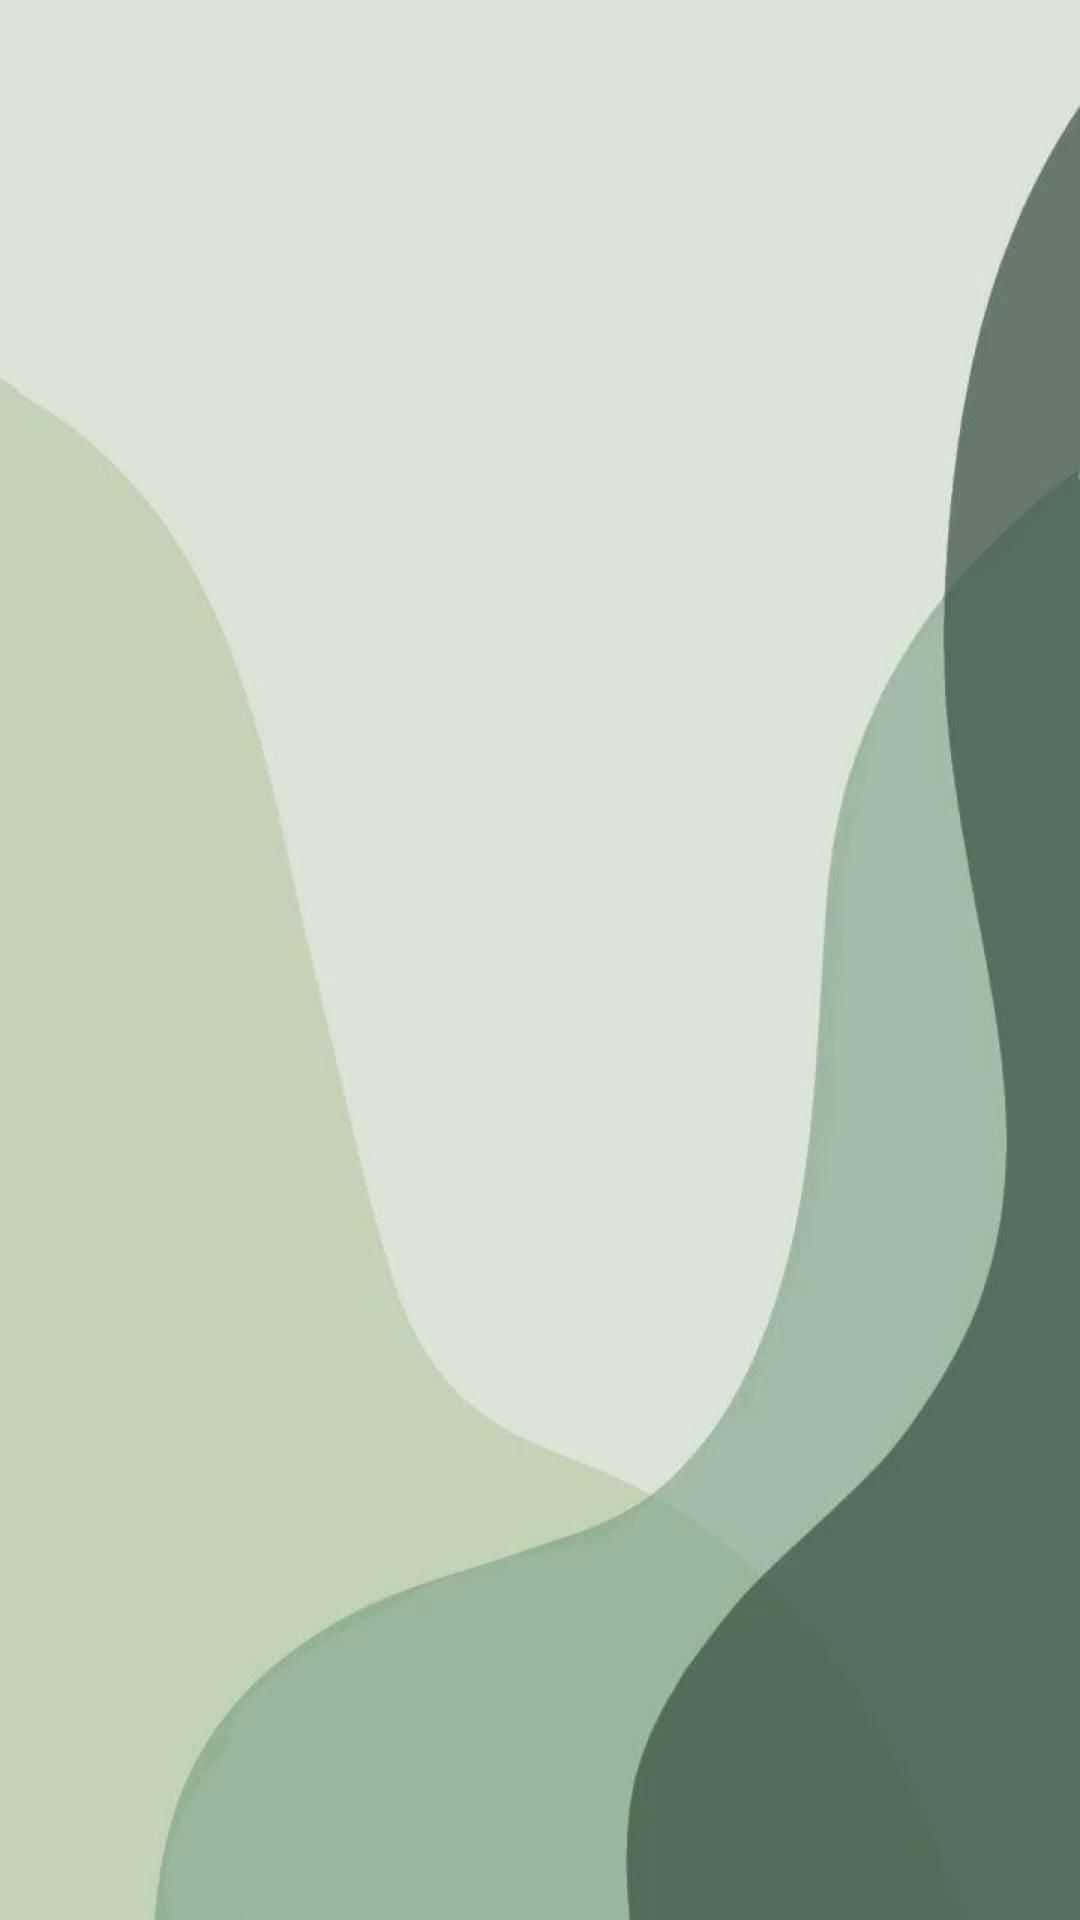 Download Cute Sage Green See Through Curving Slope Shapes Wallpaper ...